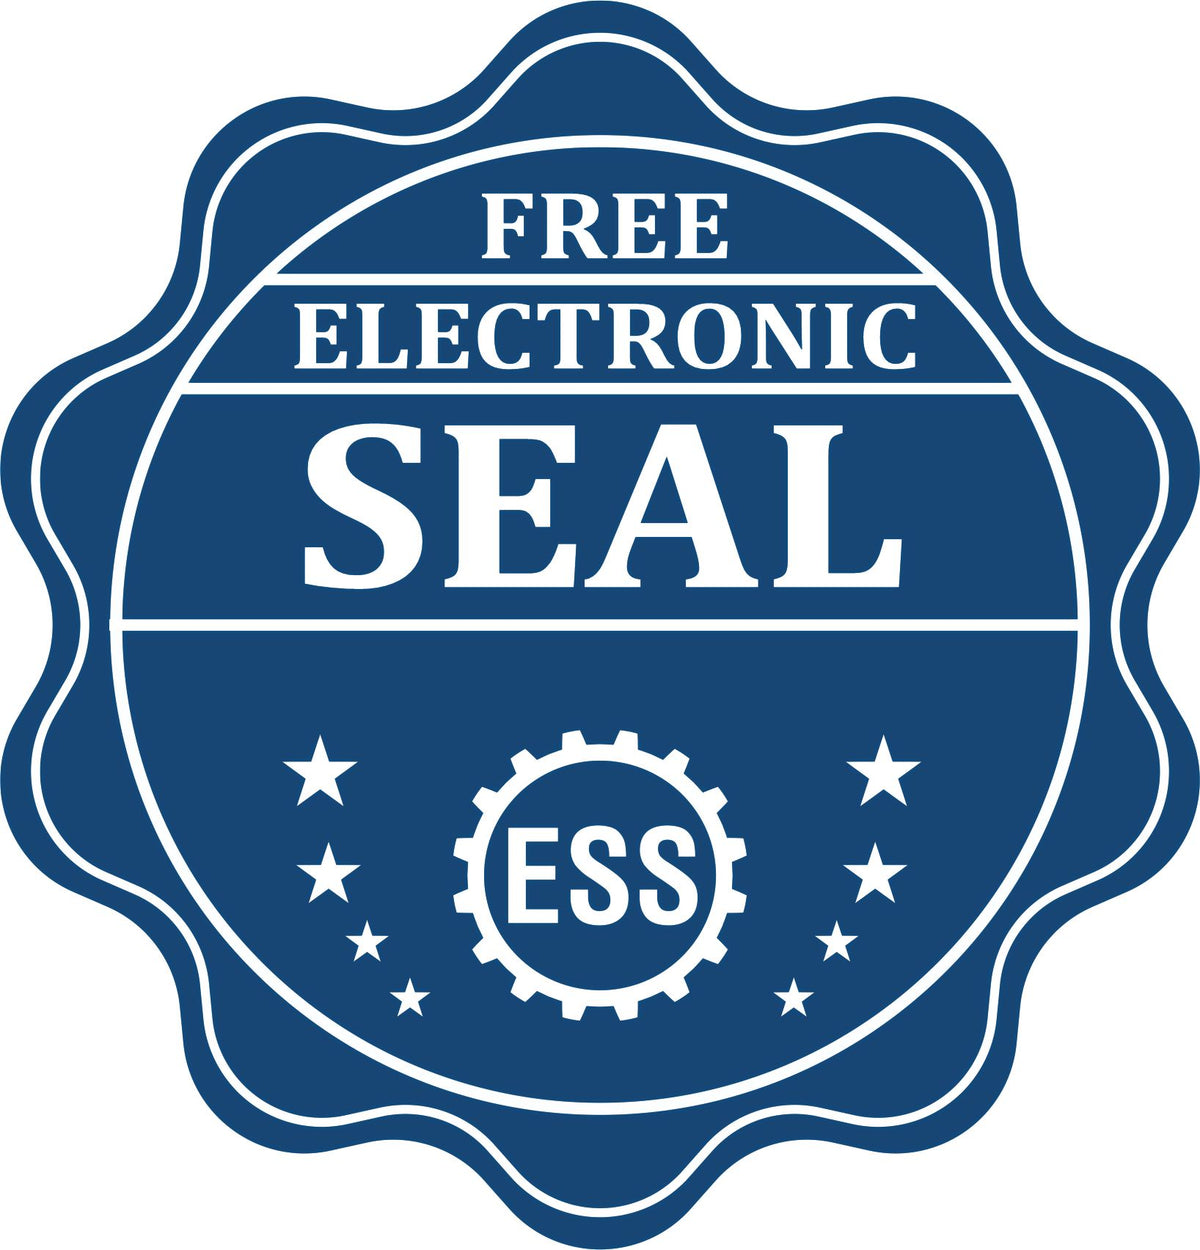 A badge showing a free electronic seal for the Slim Pre-Inked Minnesota Land Surveyor Seal Stamp with stars and the ESS gear on the emblem.